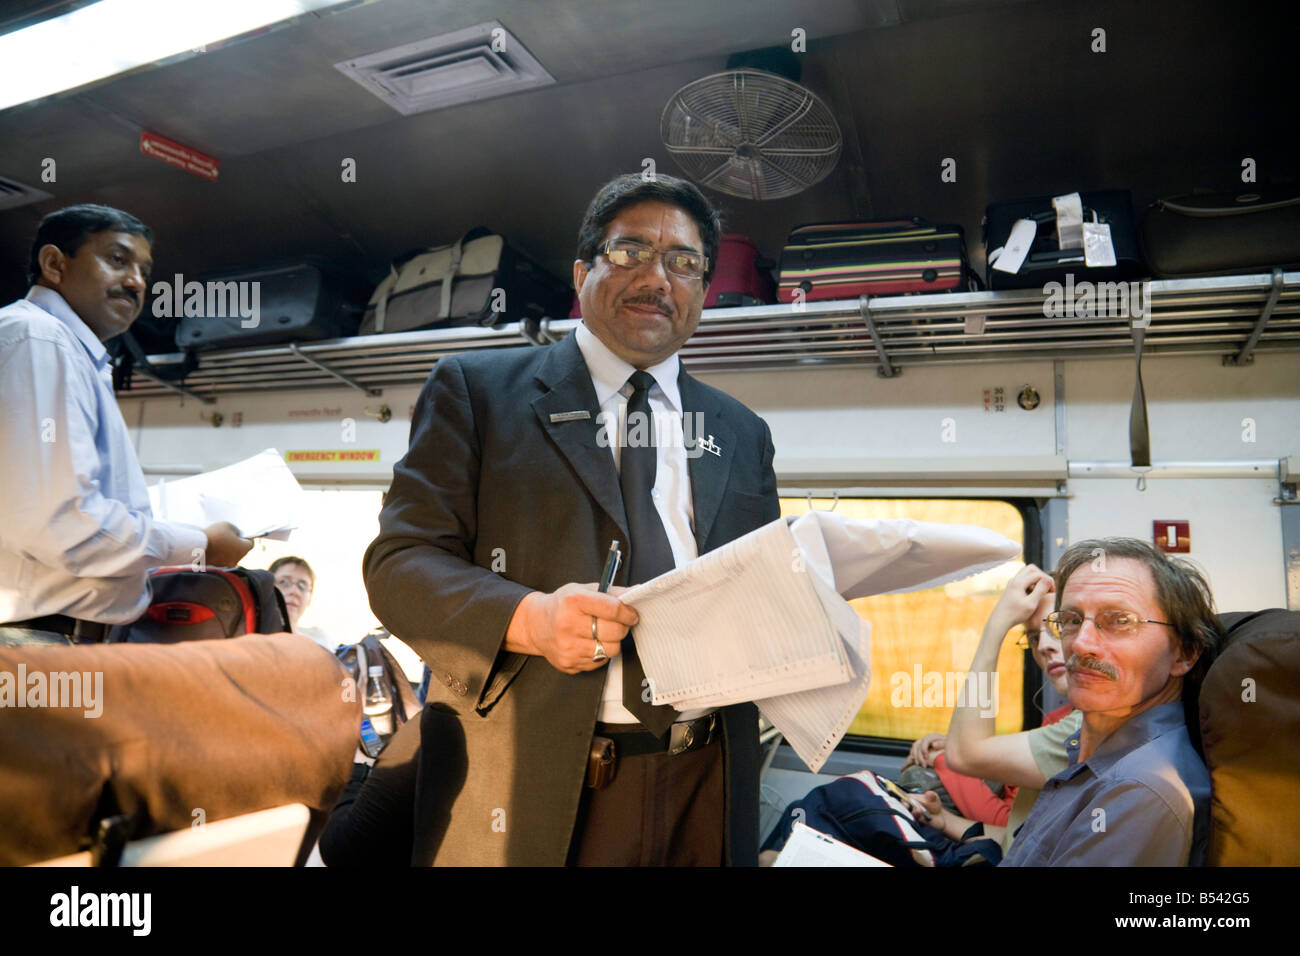 A ticket inspector on the Indian Railways, Sawai Madhopur to Delhi express, India Stock Photo